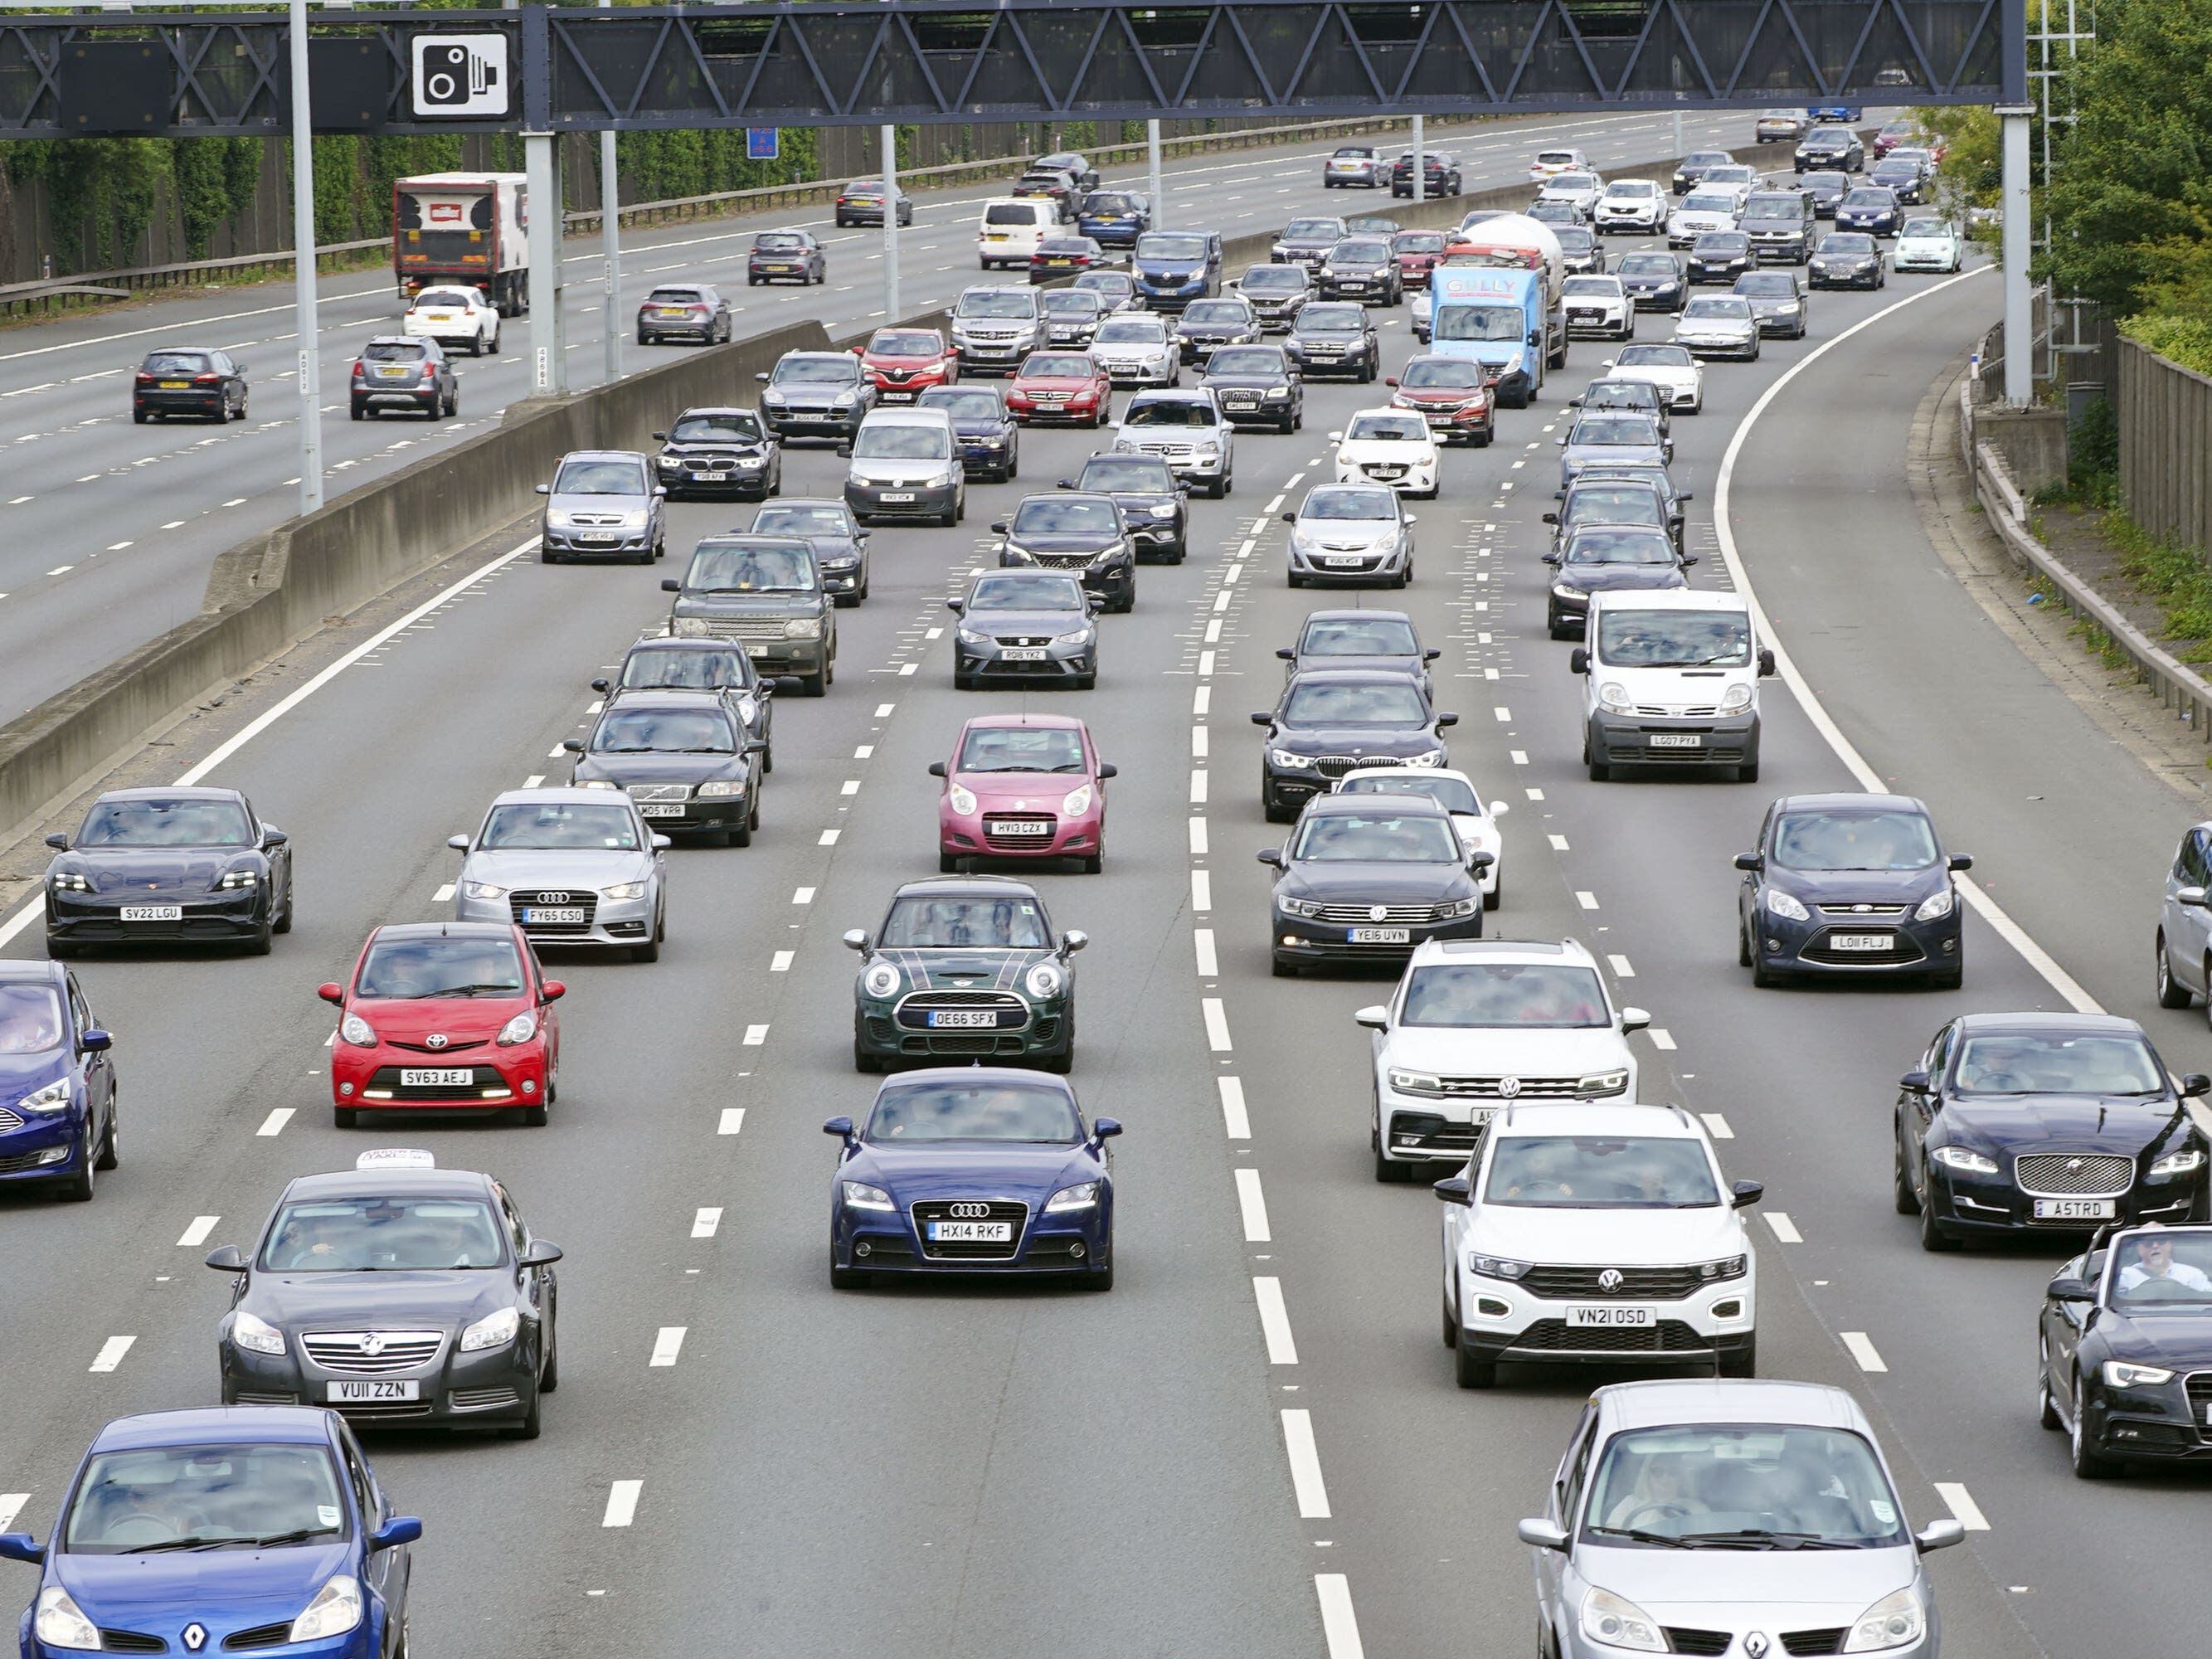 Weekend closure of M25 stretch will cause 10-mile diversion